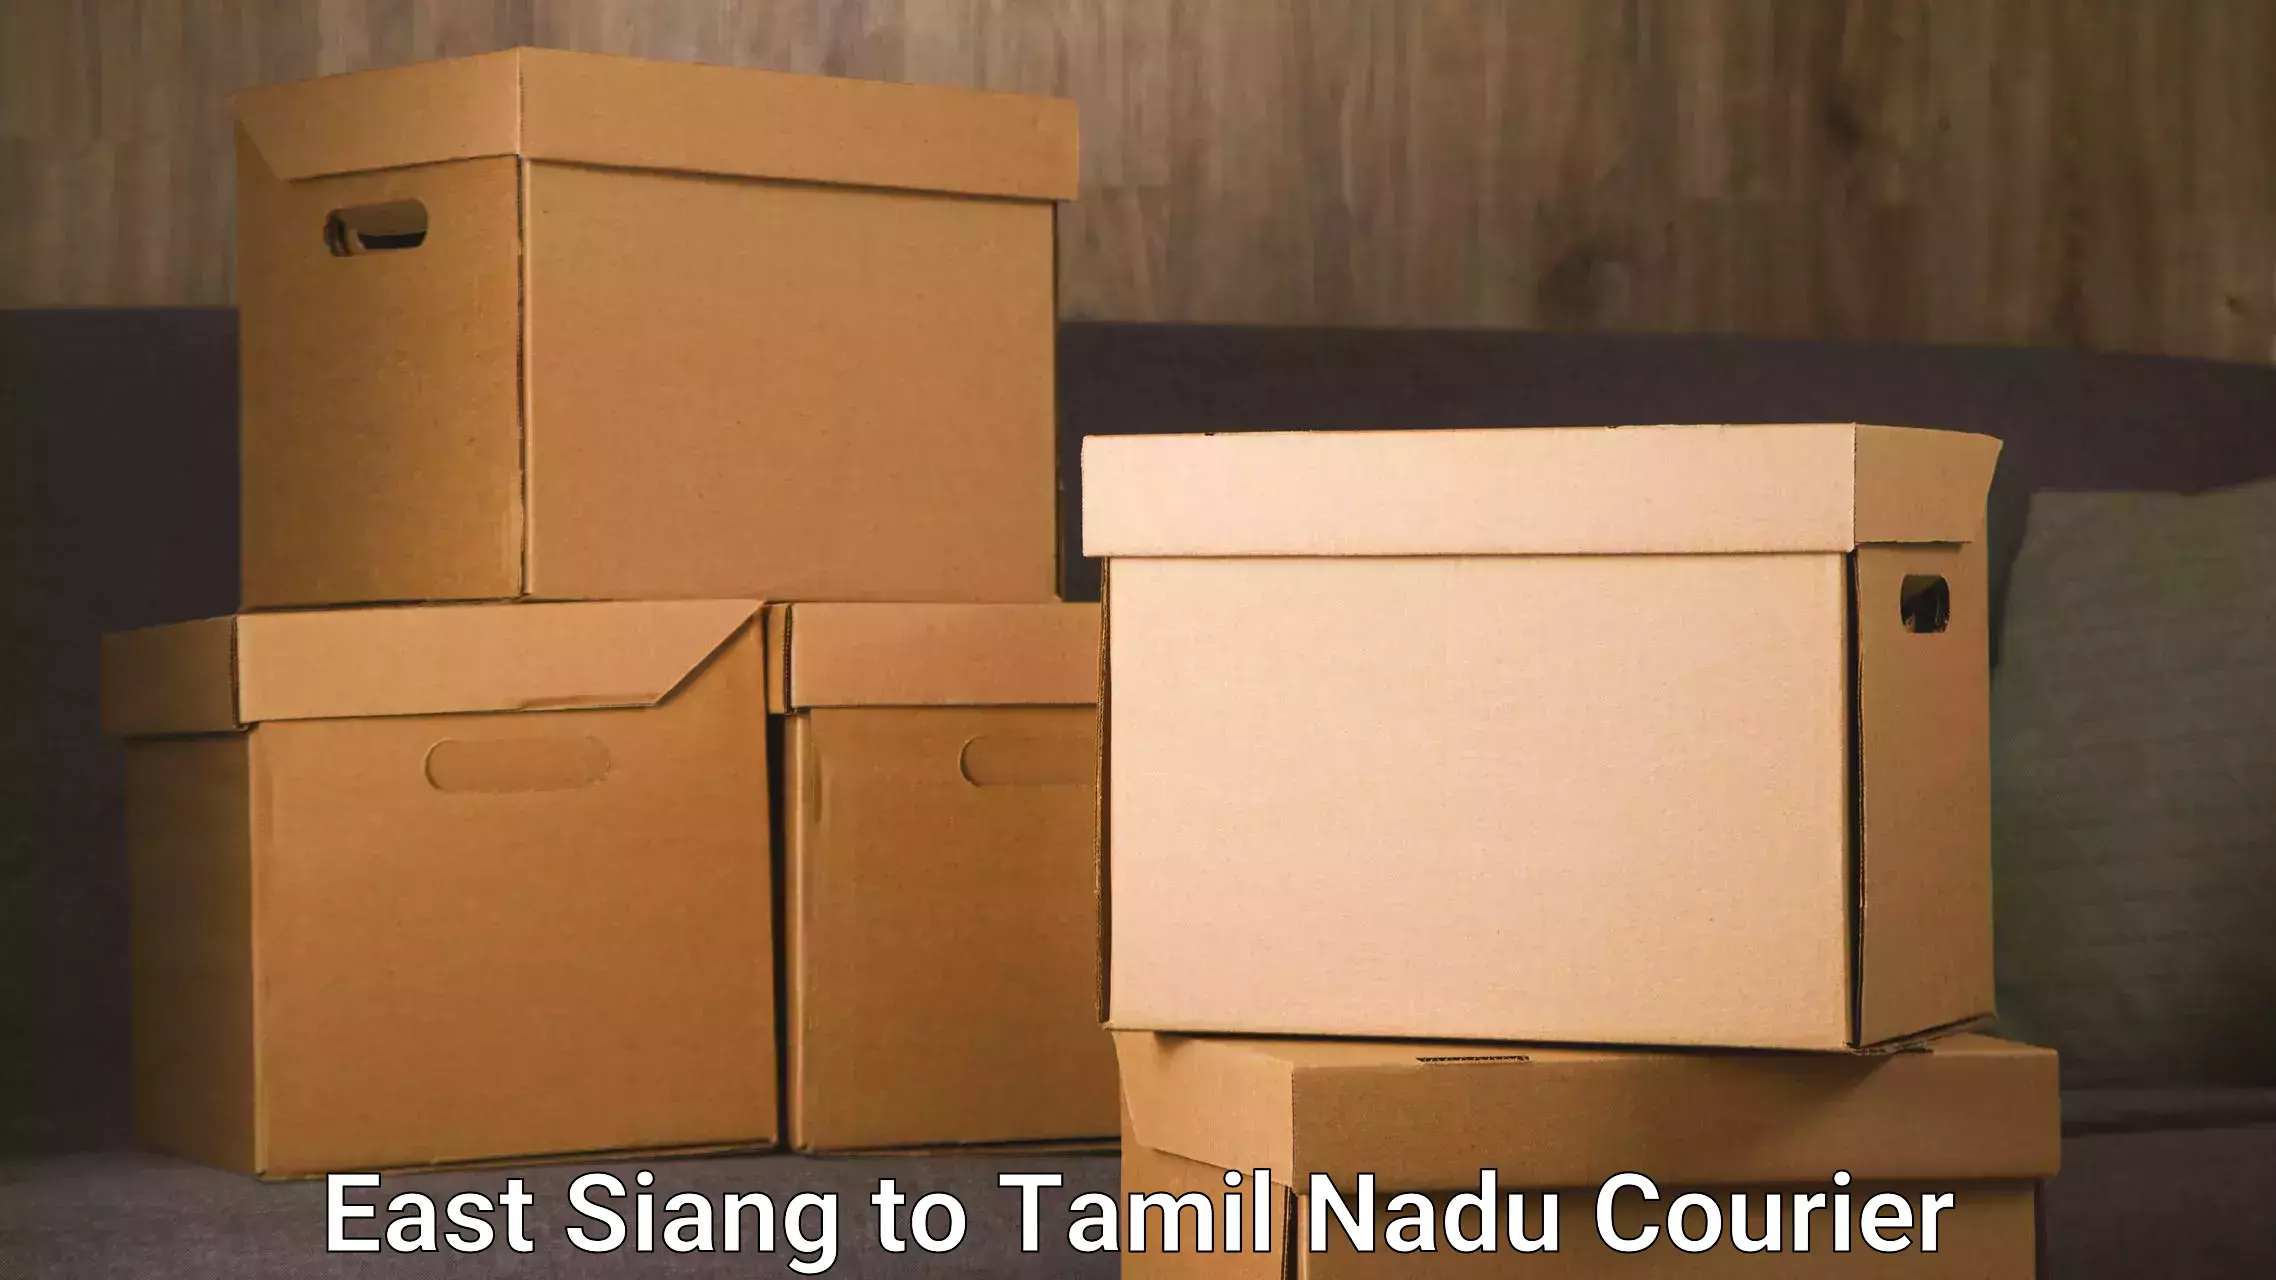 Tracking updates in East Siang to Tamil Nadu